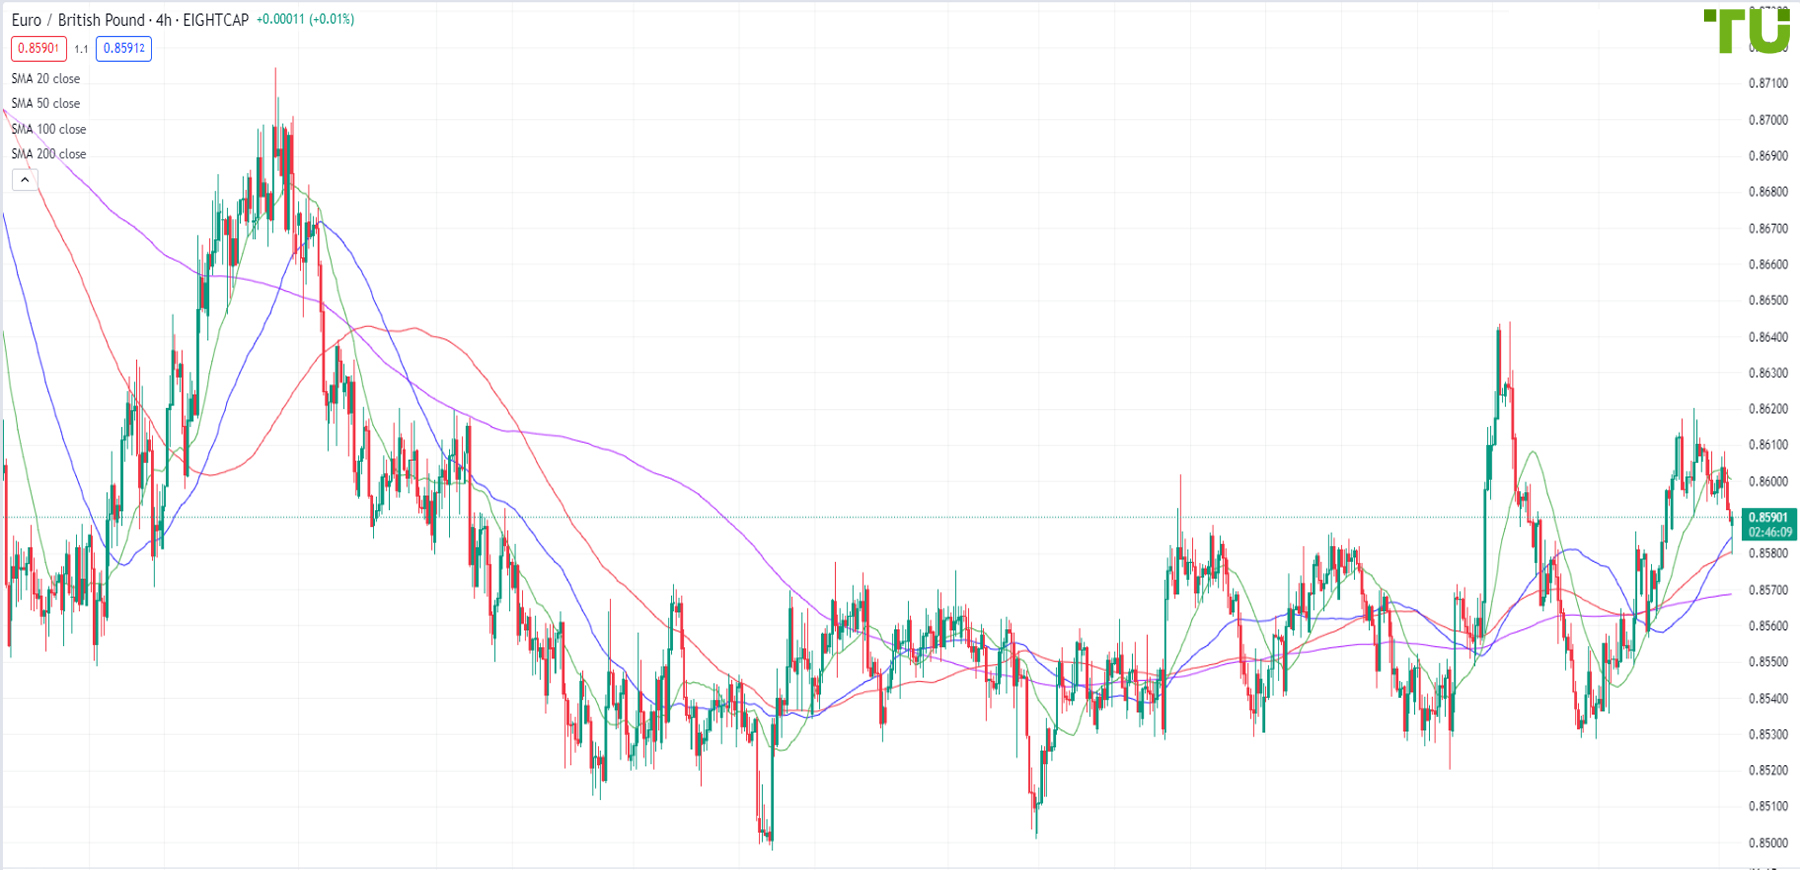 EUR/GBP is declining